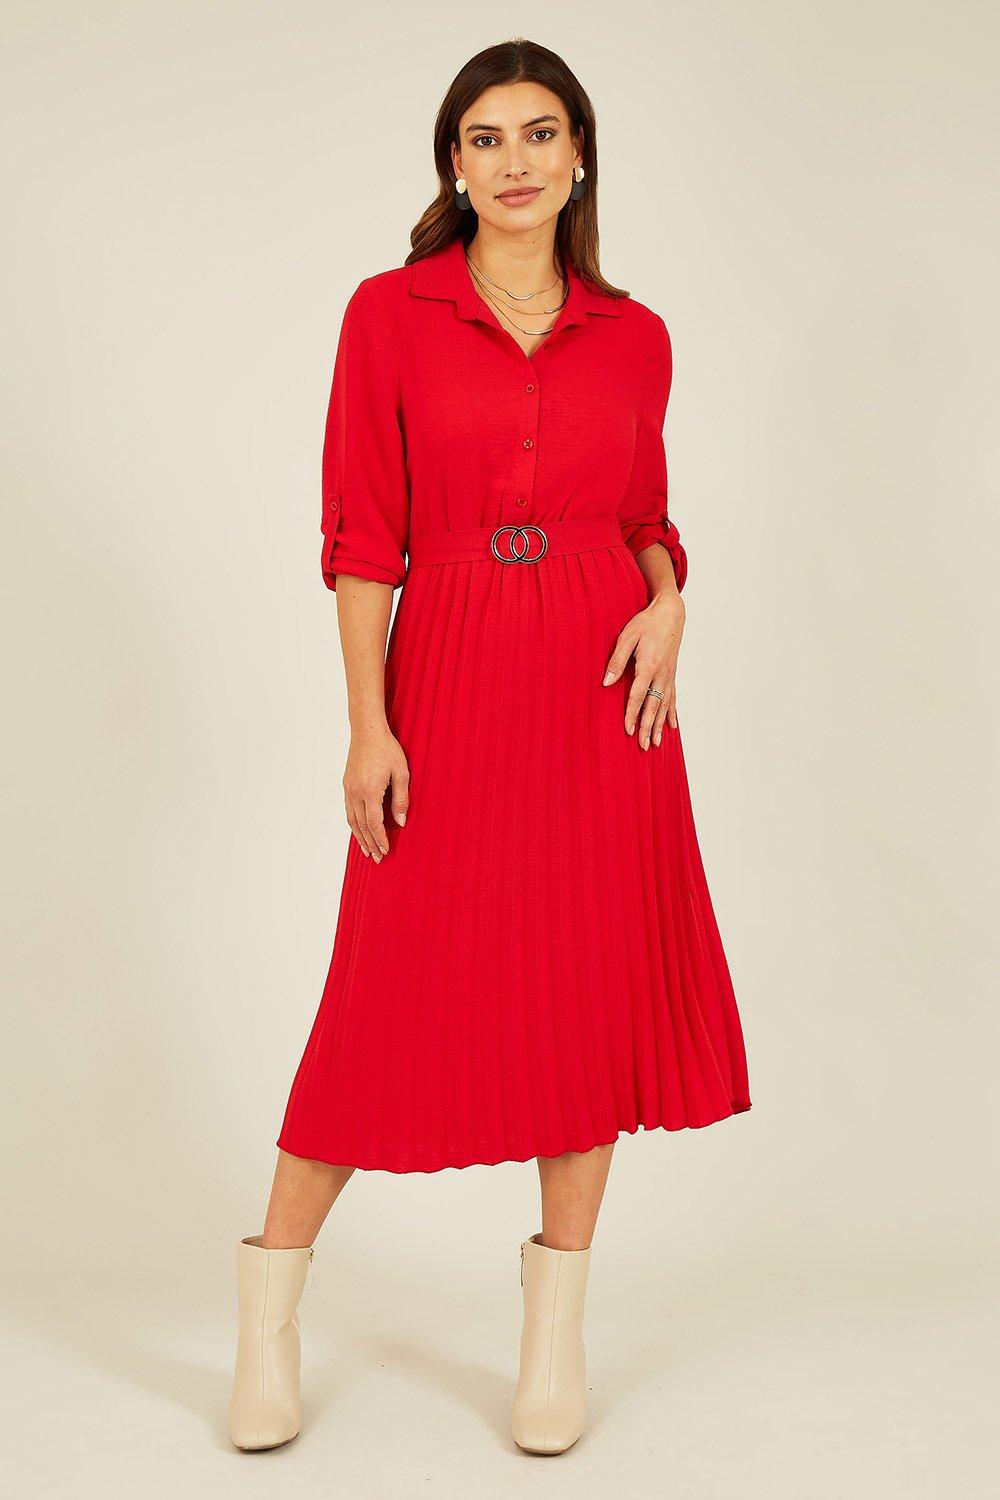 Red Pleated Skirt Midi Dress With Gold Buckle